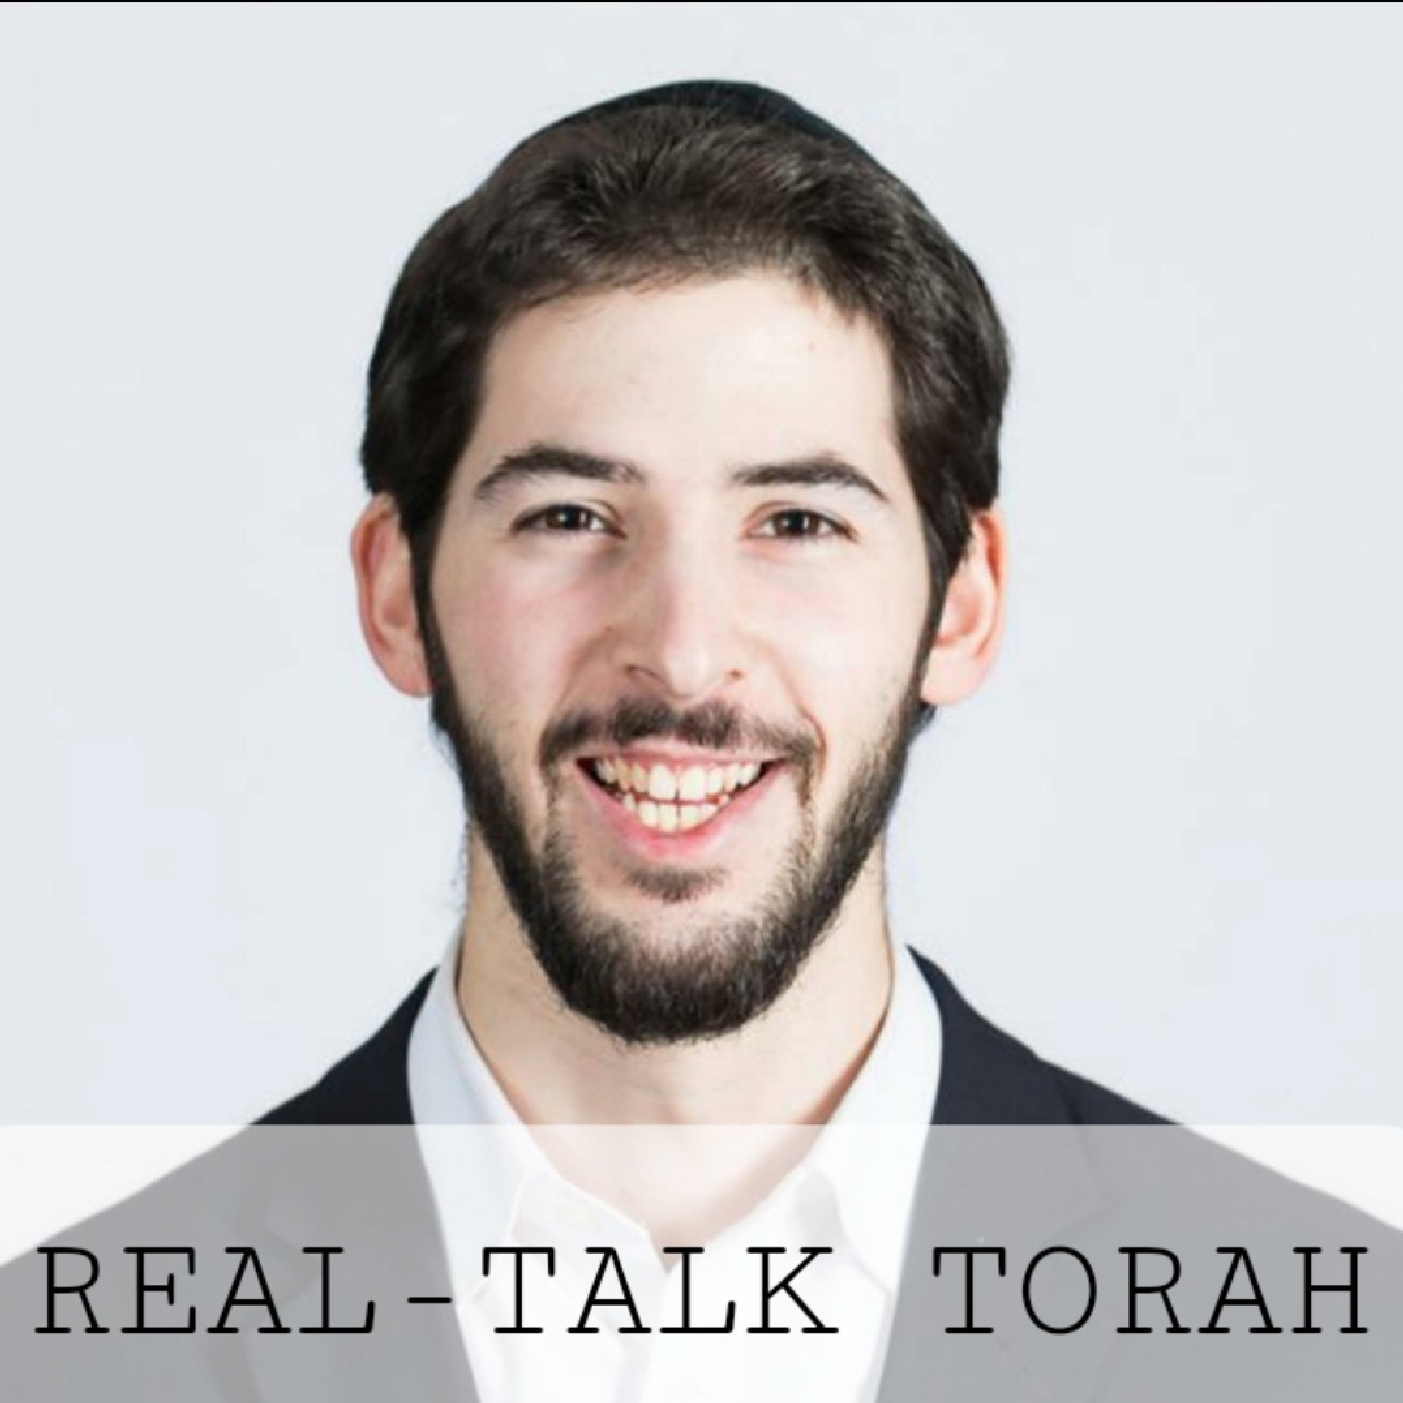 Real-Talk Torah: The Leining We Think We Know 🍚🥄🐂🐏🐑🐐